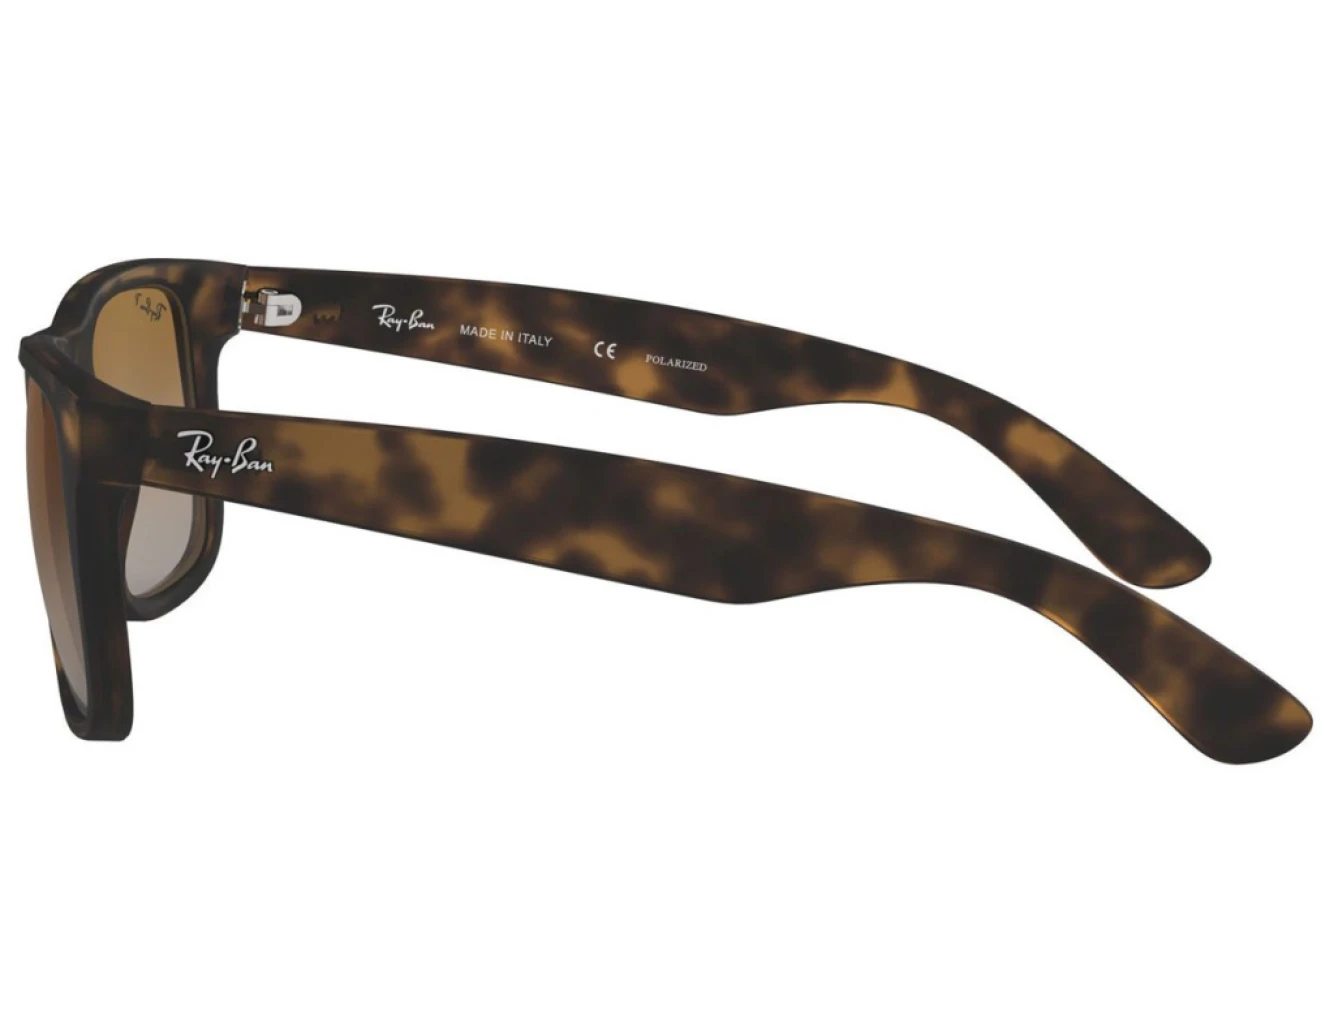 Ray-Ban Justin RB4165-865/T5